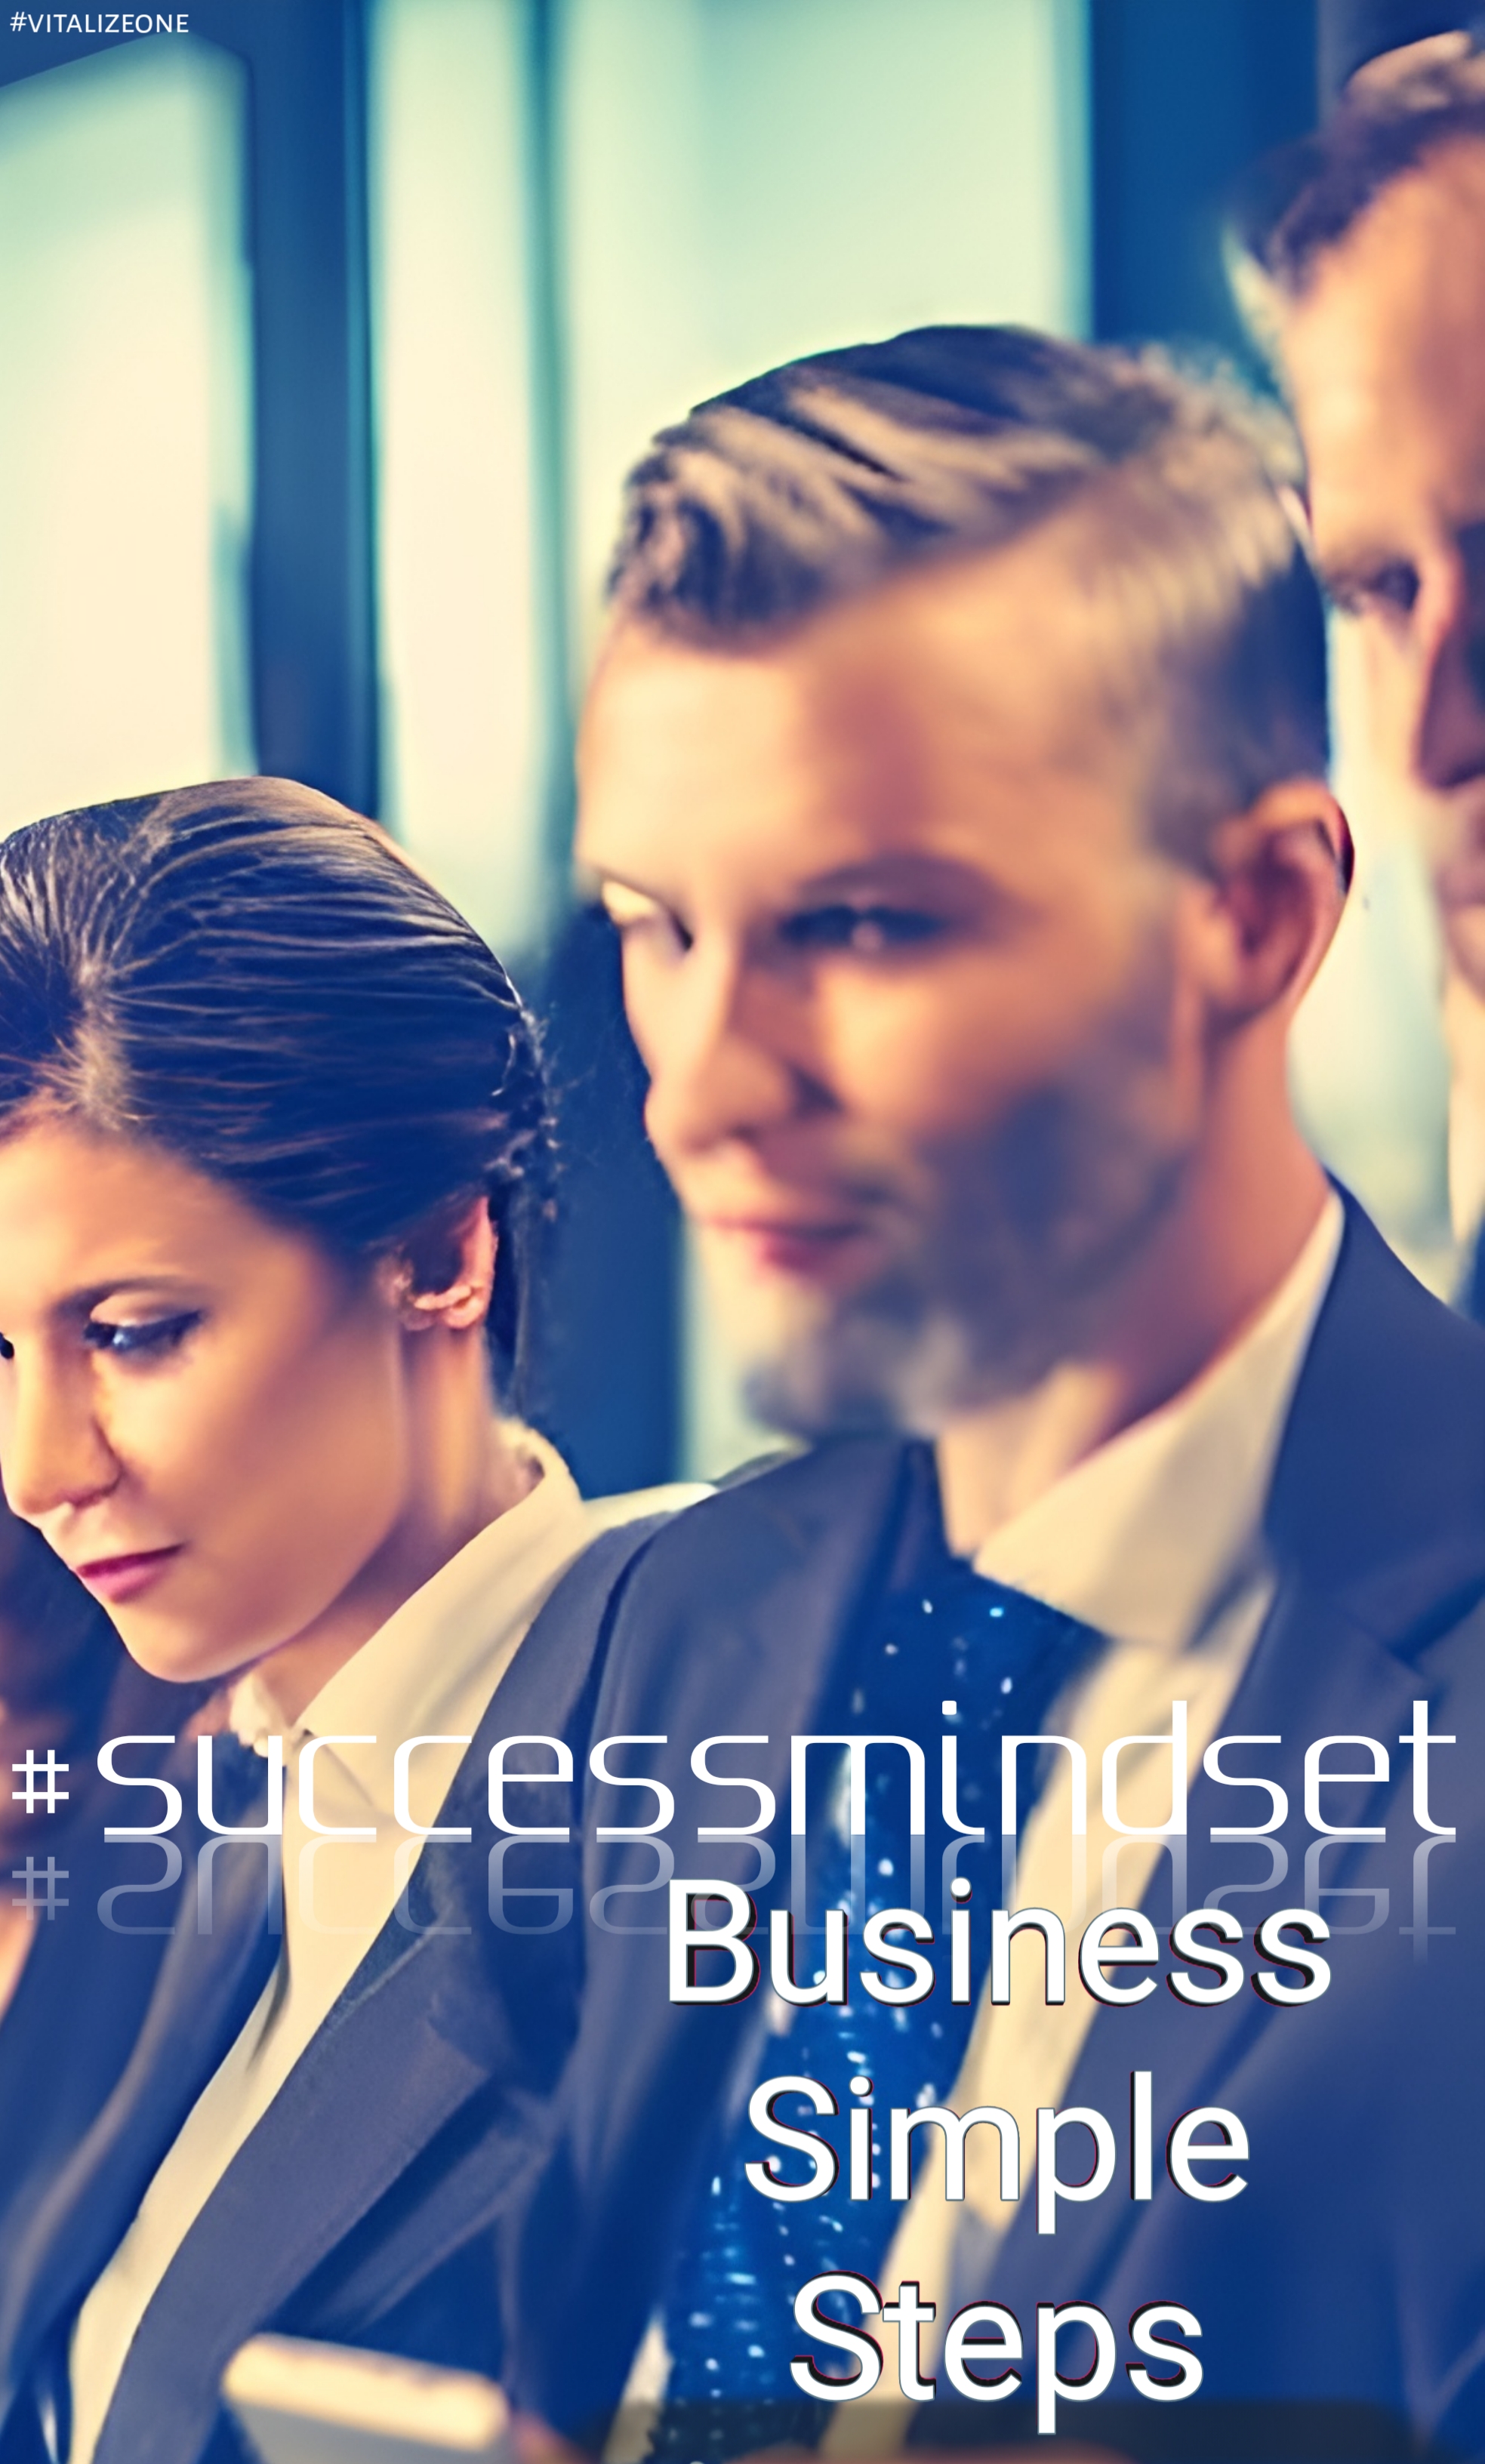 Help Your Business Achieve Success With These Simple Steps #successmindset | VitalyTennant.com | #vitalizeone